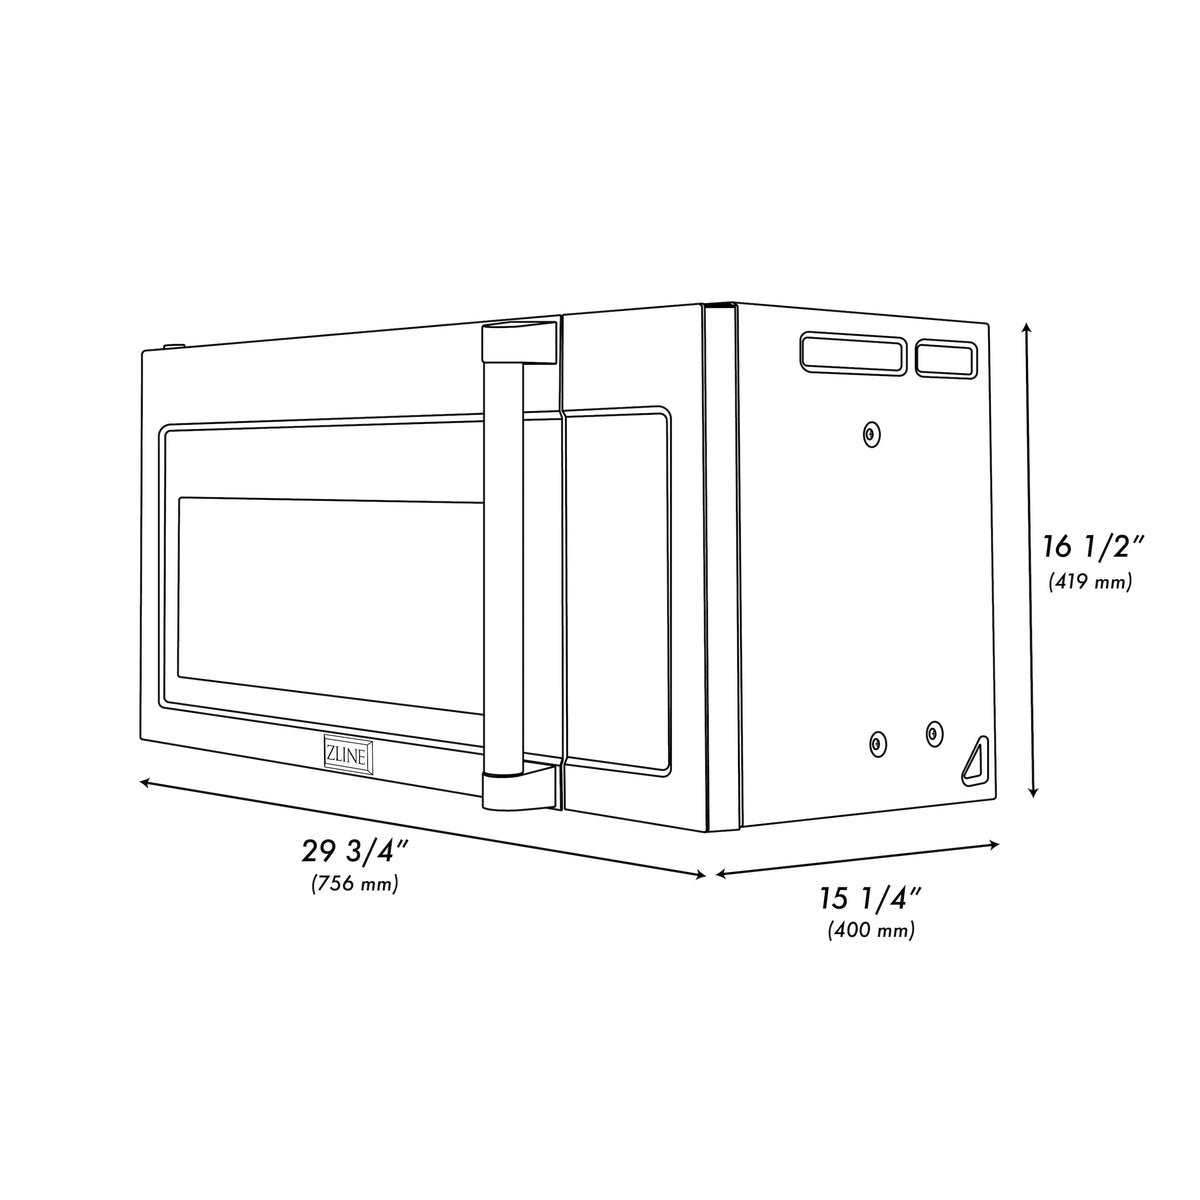 ZLINE 30" Over the Range Convection Microwave Oven with Traditional Handle